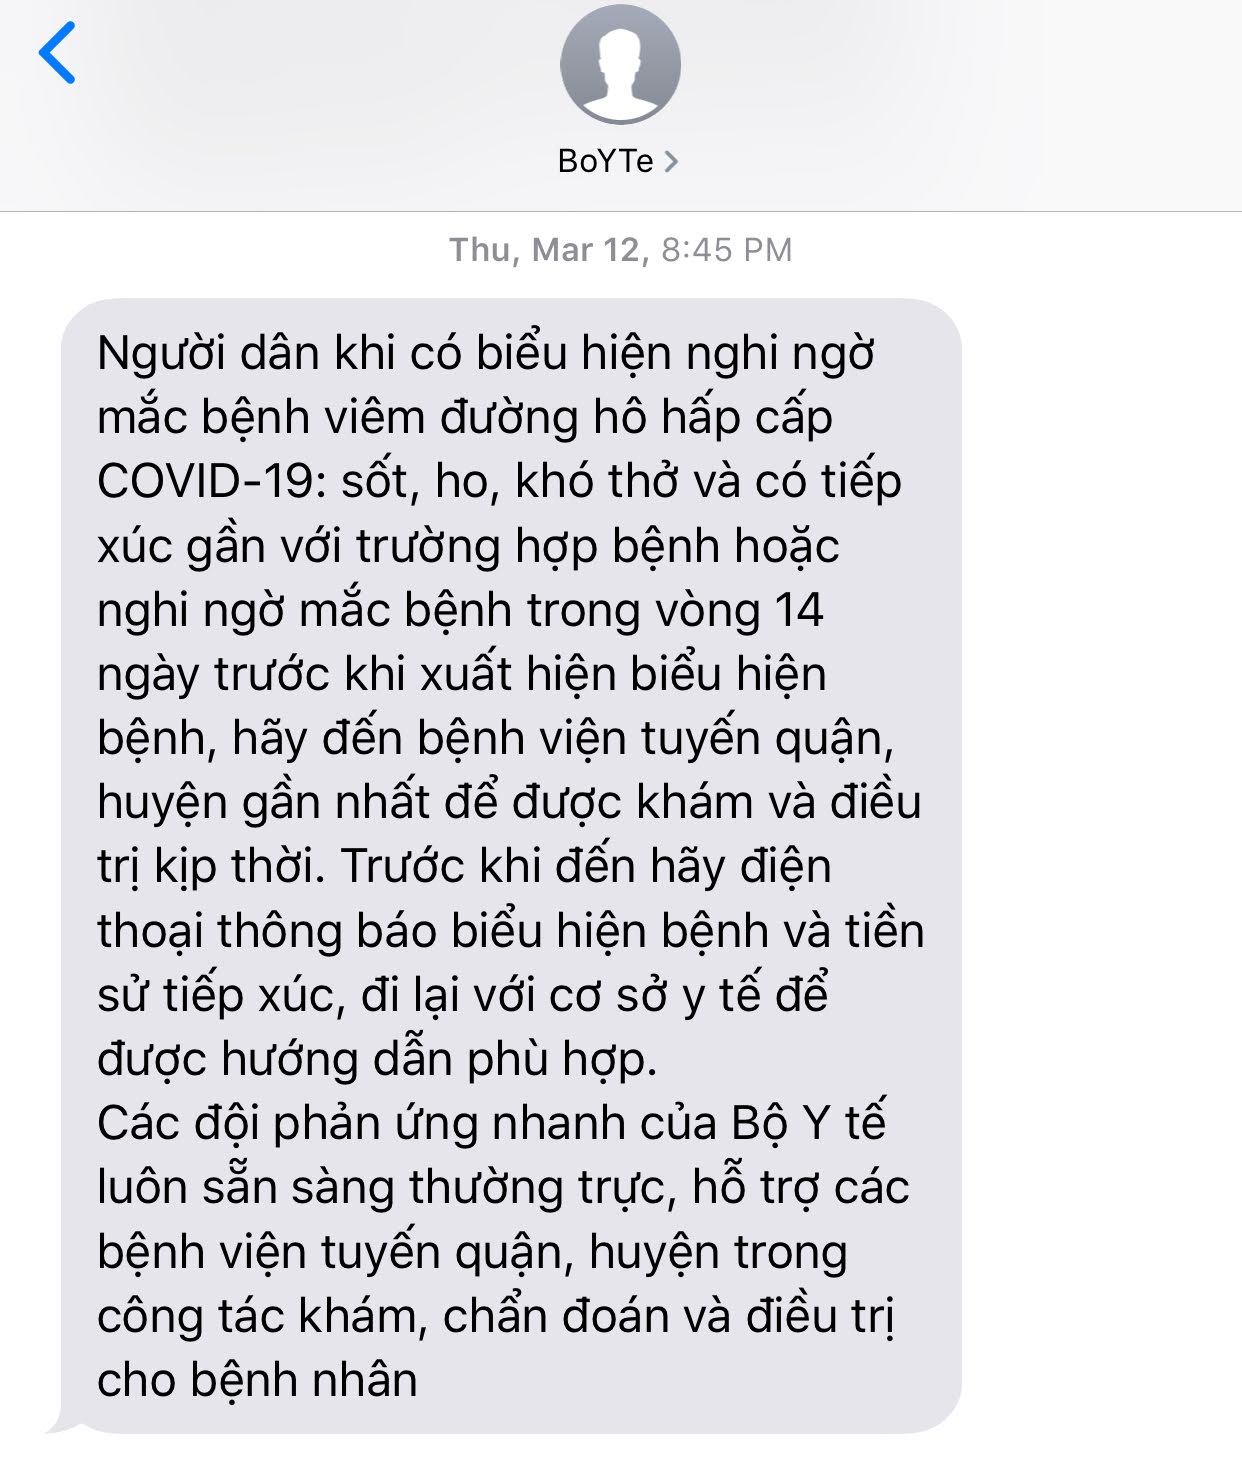 A screenshot shows a message from the Vietnamese Ministry of Health to a citizen, calling people to undergo health check if they have suspicious signs of COVID-19